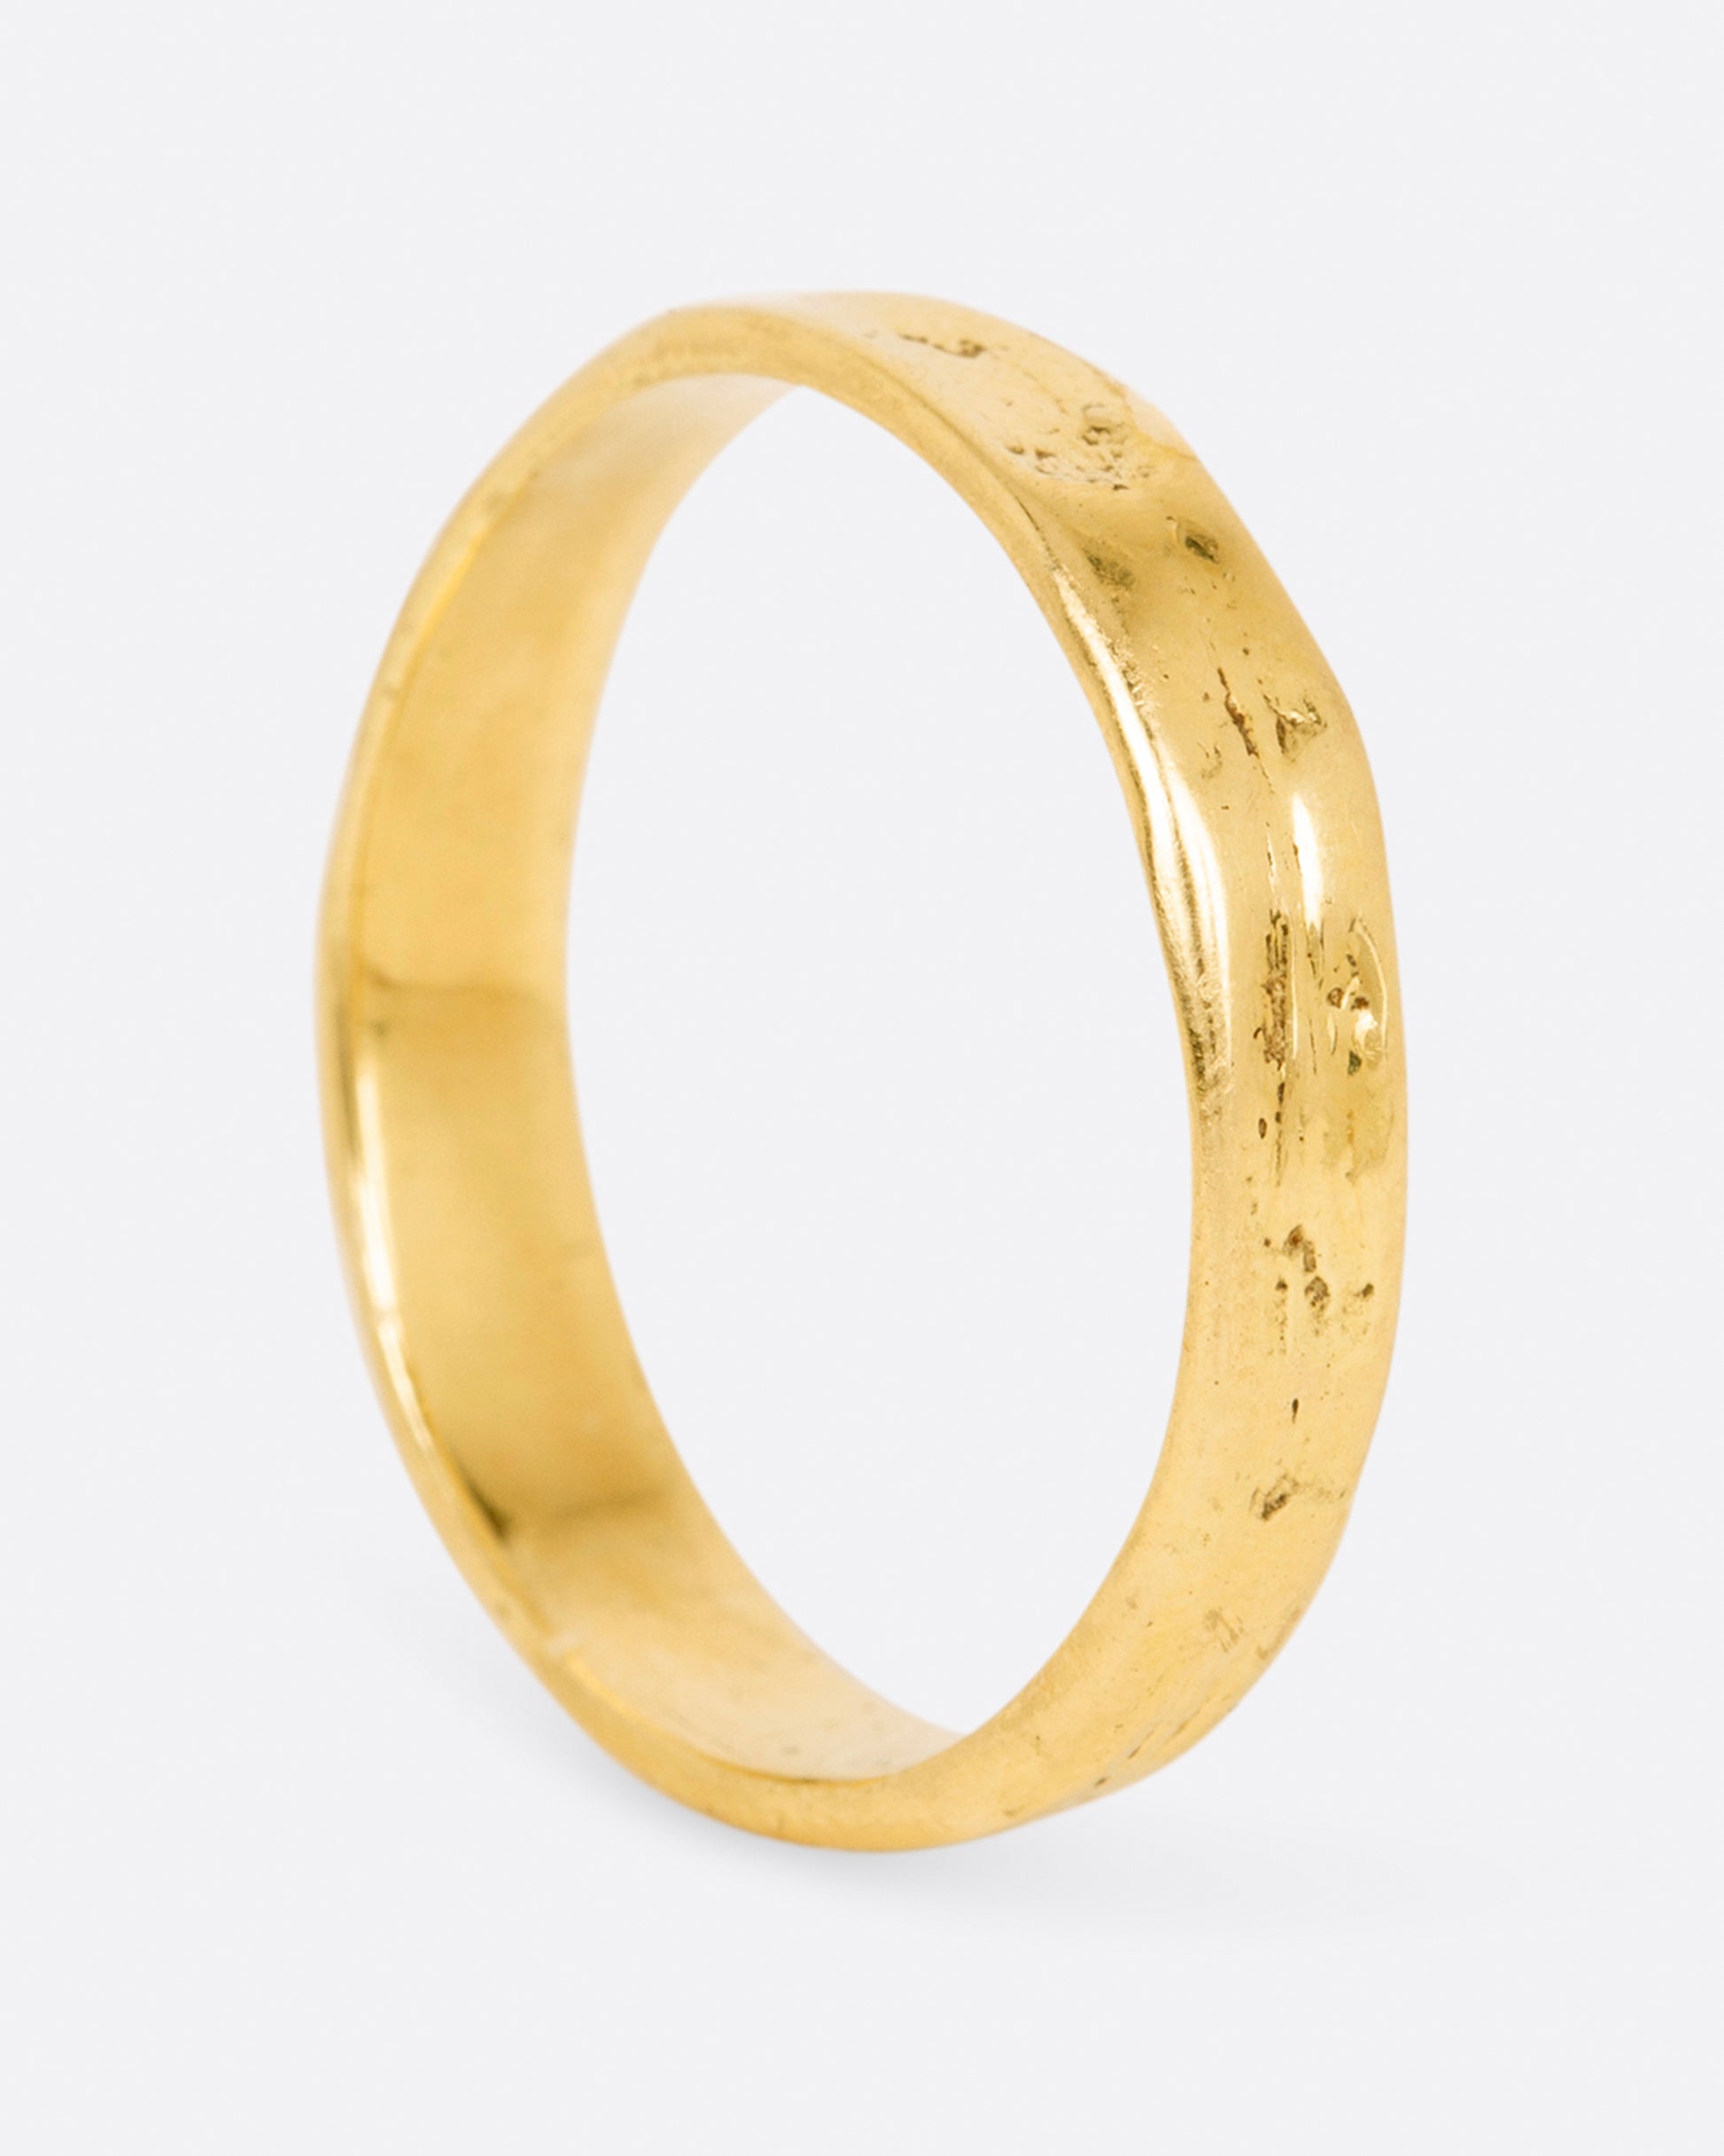 A textured yellow gold band that is meant to look worn in, shown standing up.